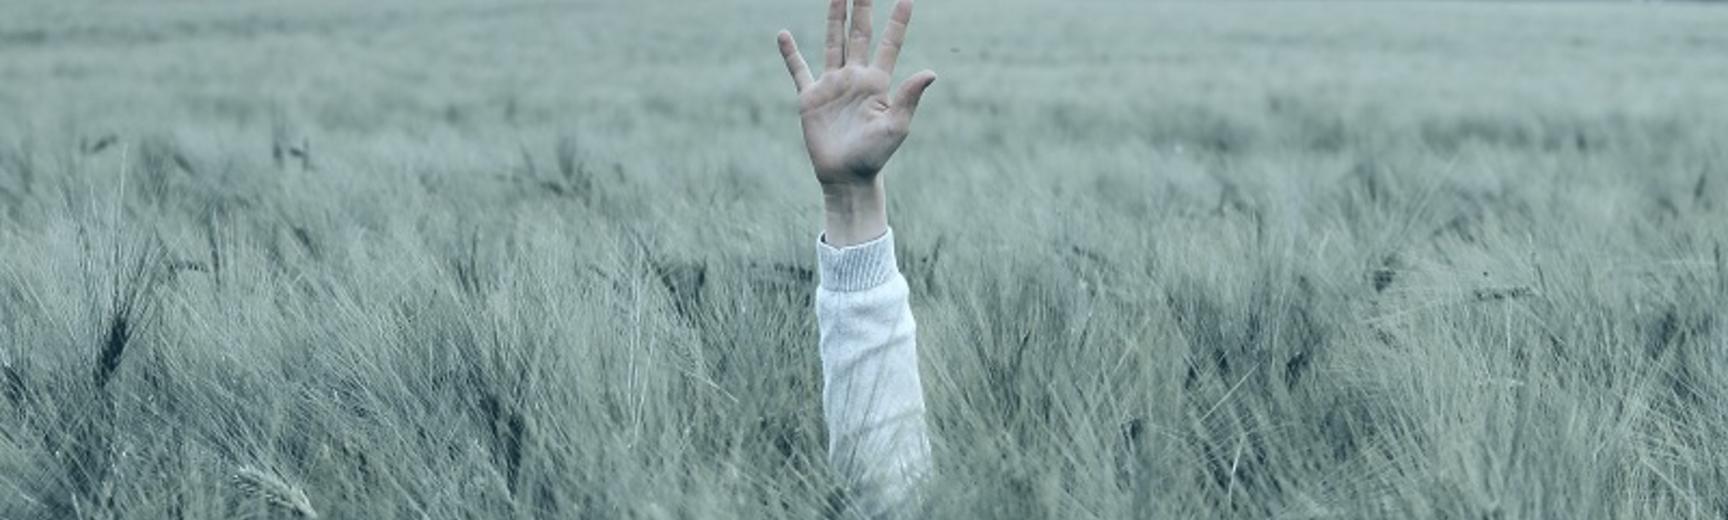 a person's arm held up above a tall field of wheat